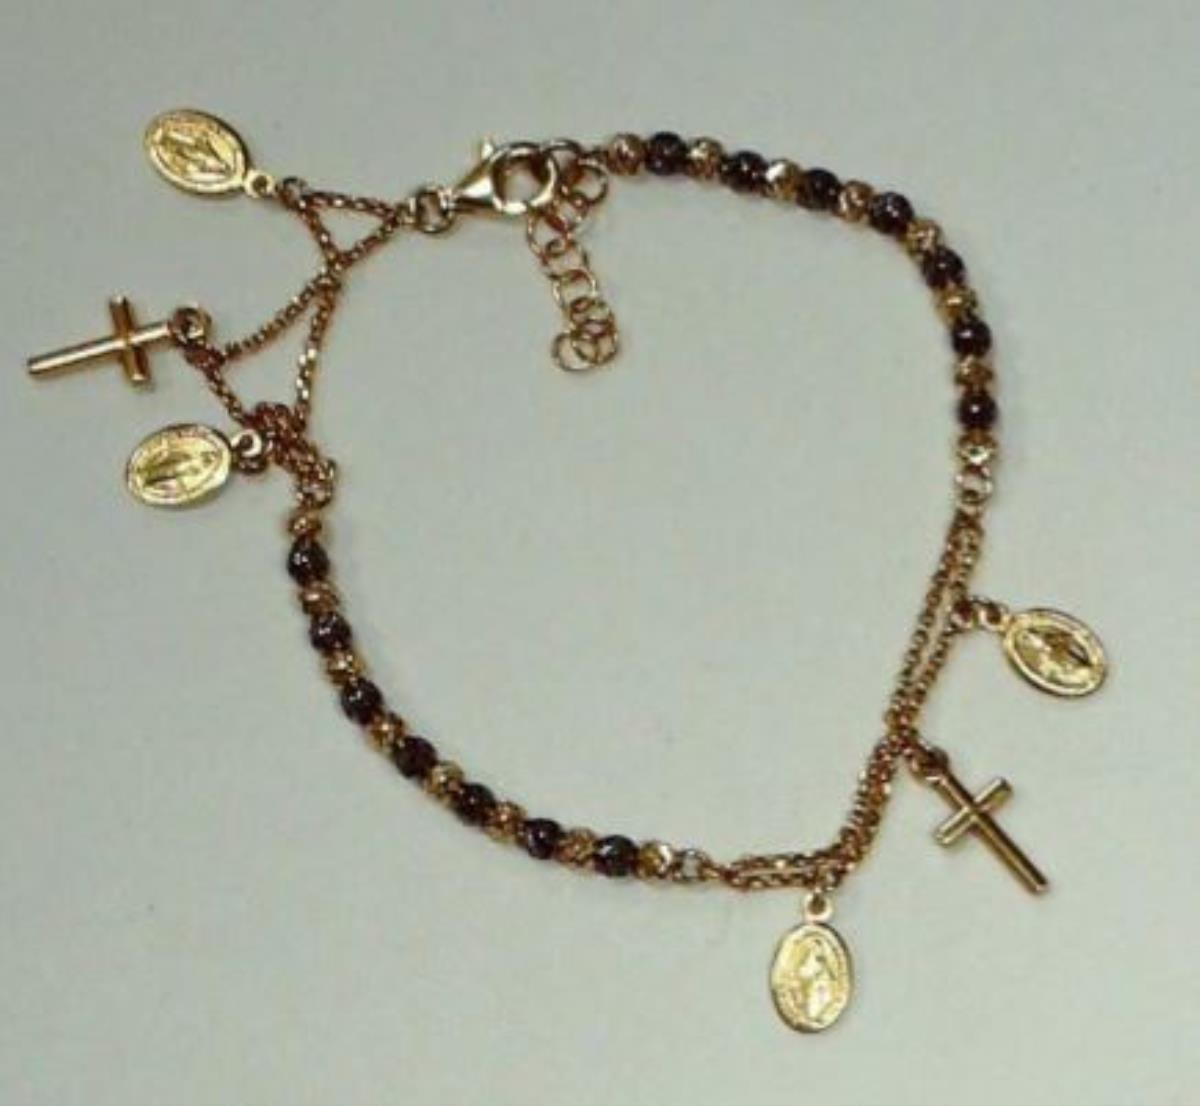 Sterling Silver Black & Yellow High Polished Diamond Cut 7.5" (+ 0.75" Extender) Religious Charm & Chain Bracelet